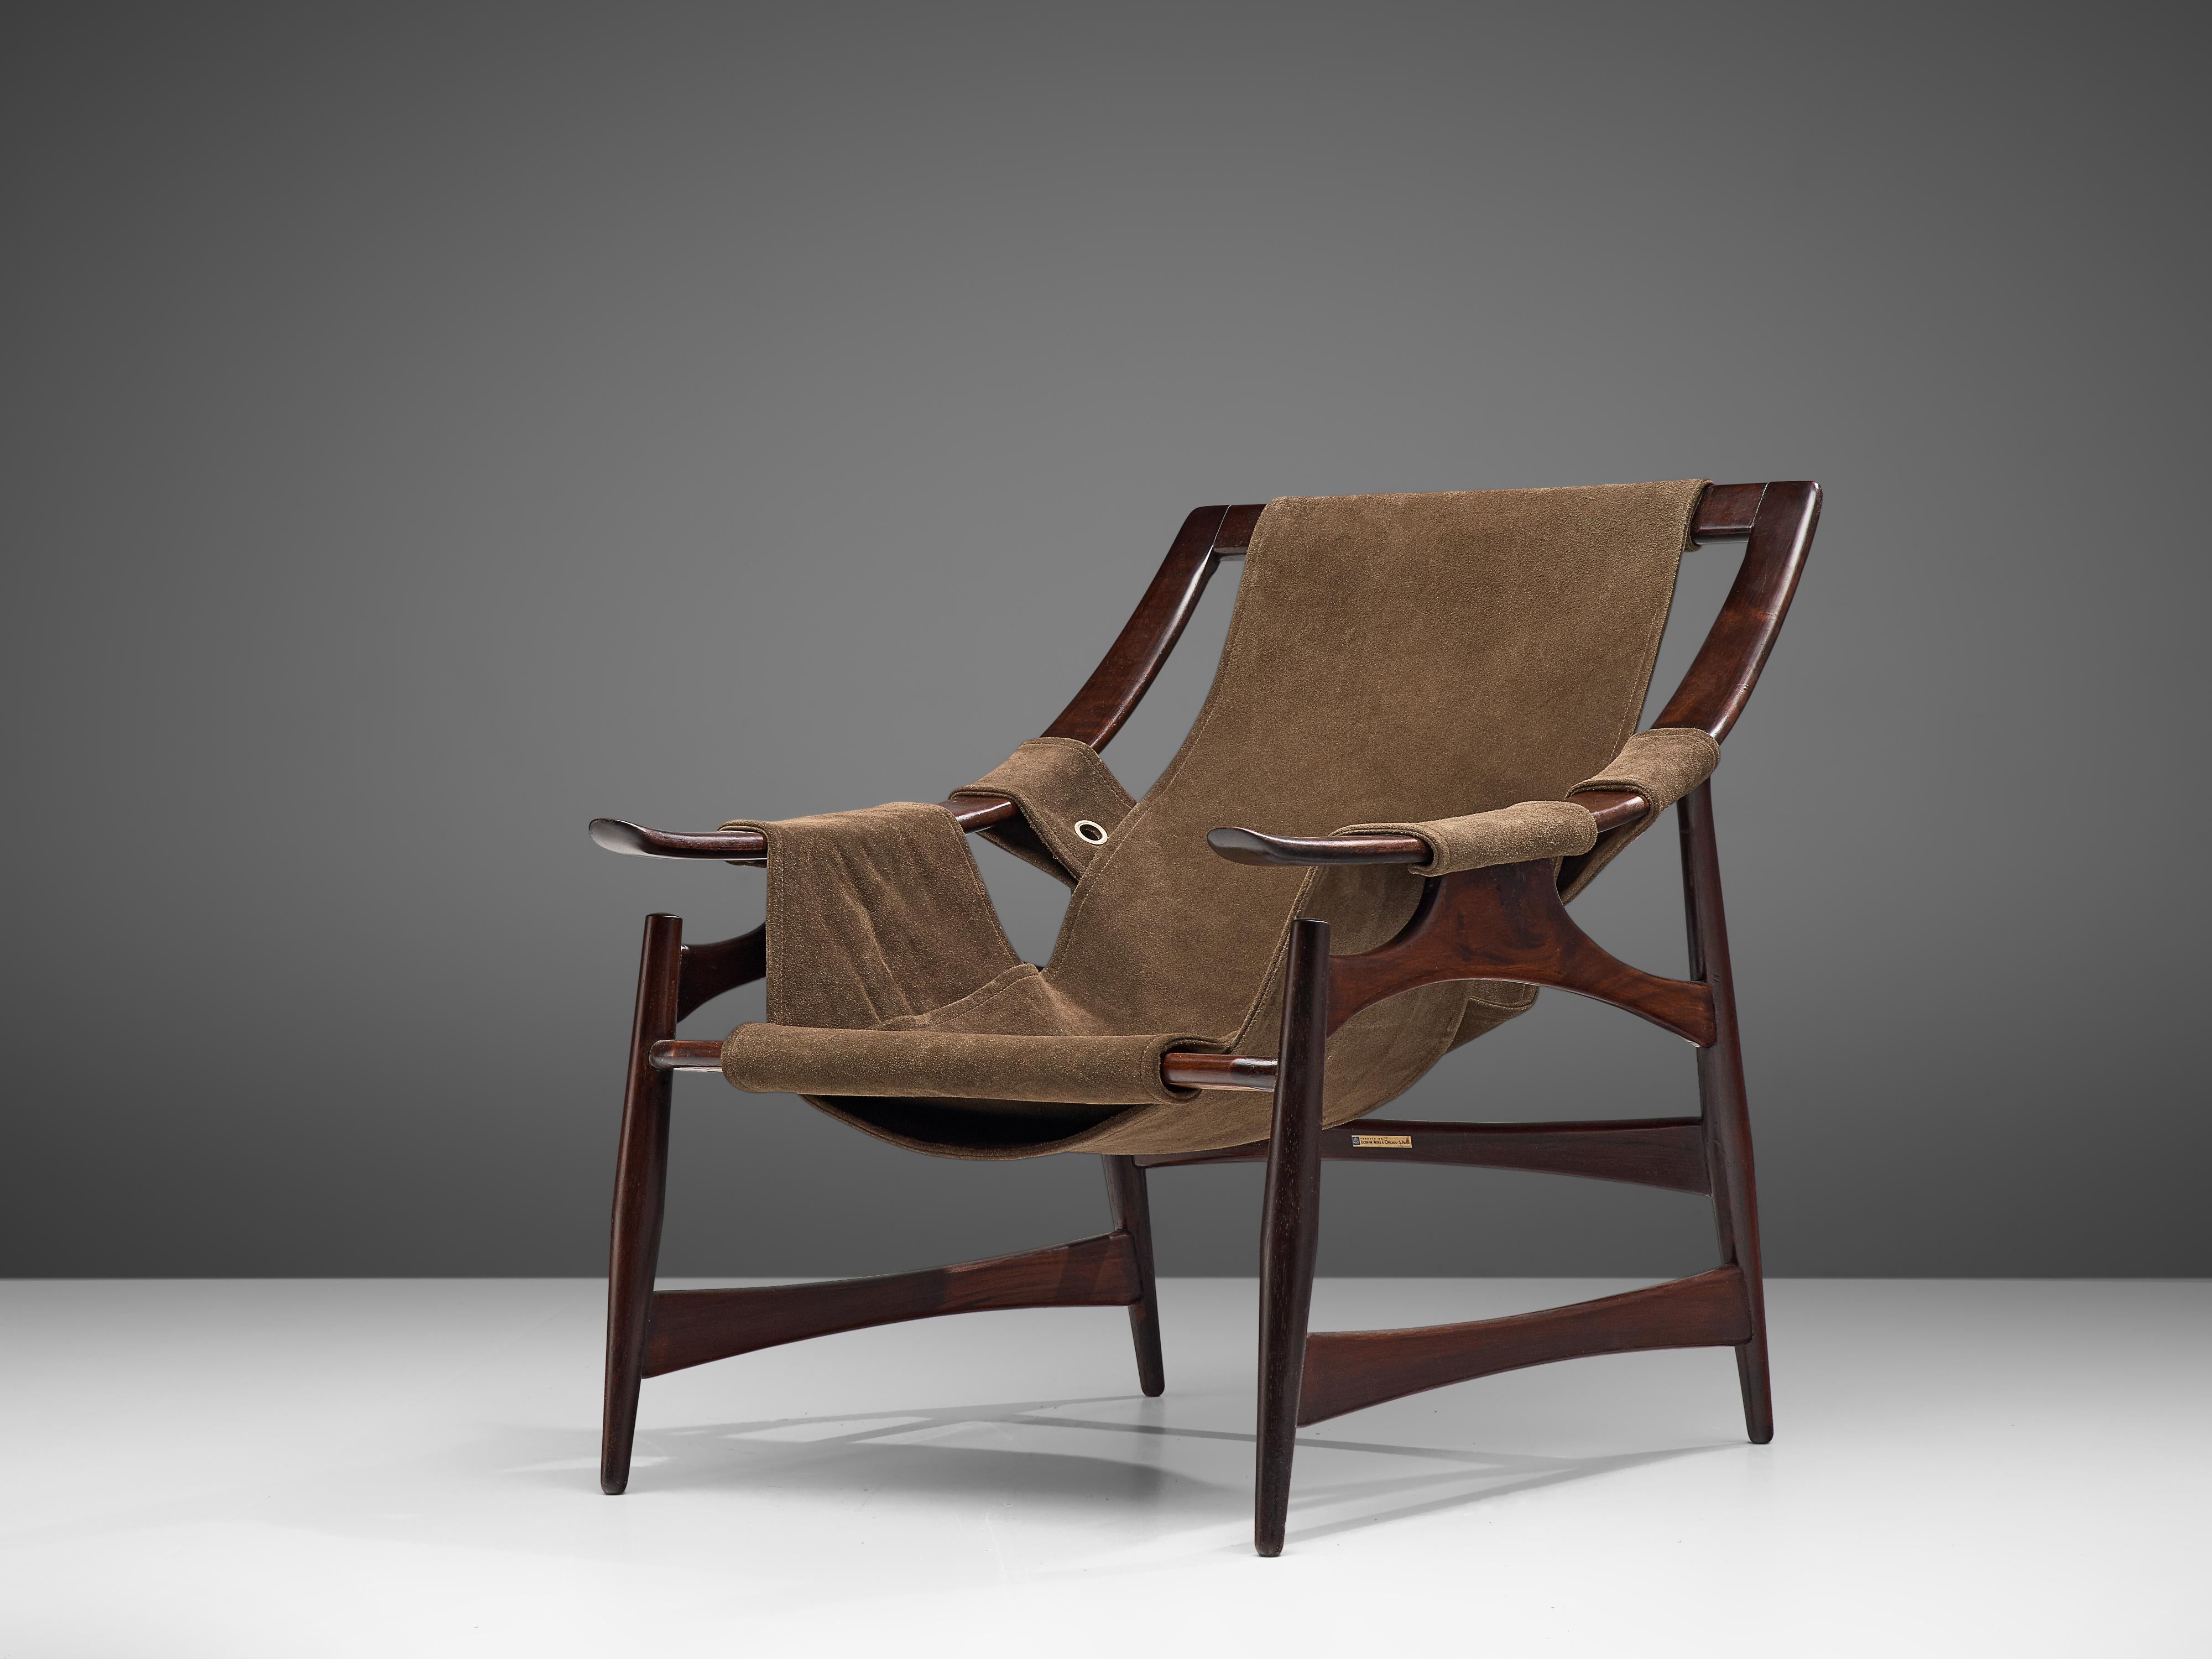 Liceu de Artes e Ofi´cios, lounge chair, imbuia and suede, Brazil, 1960s. 

Beautiful lounge chair in dark imbuia with a brown suede upholstery. The construction of the frame is created according to a skeleton layout. The design holds an open